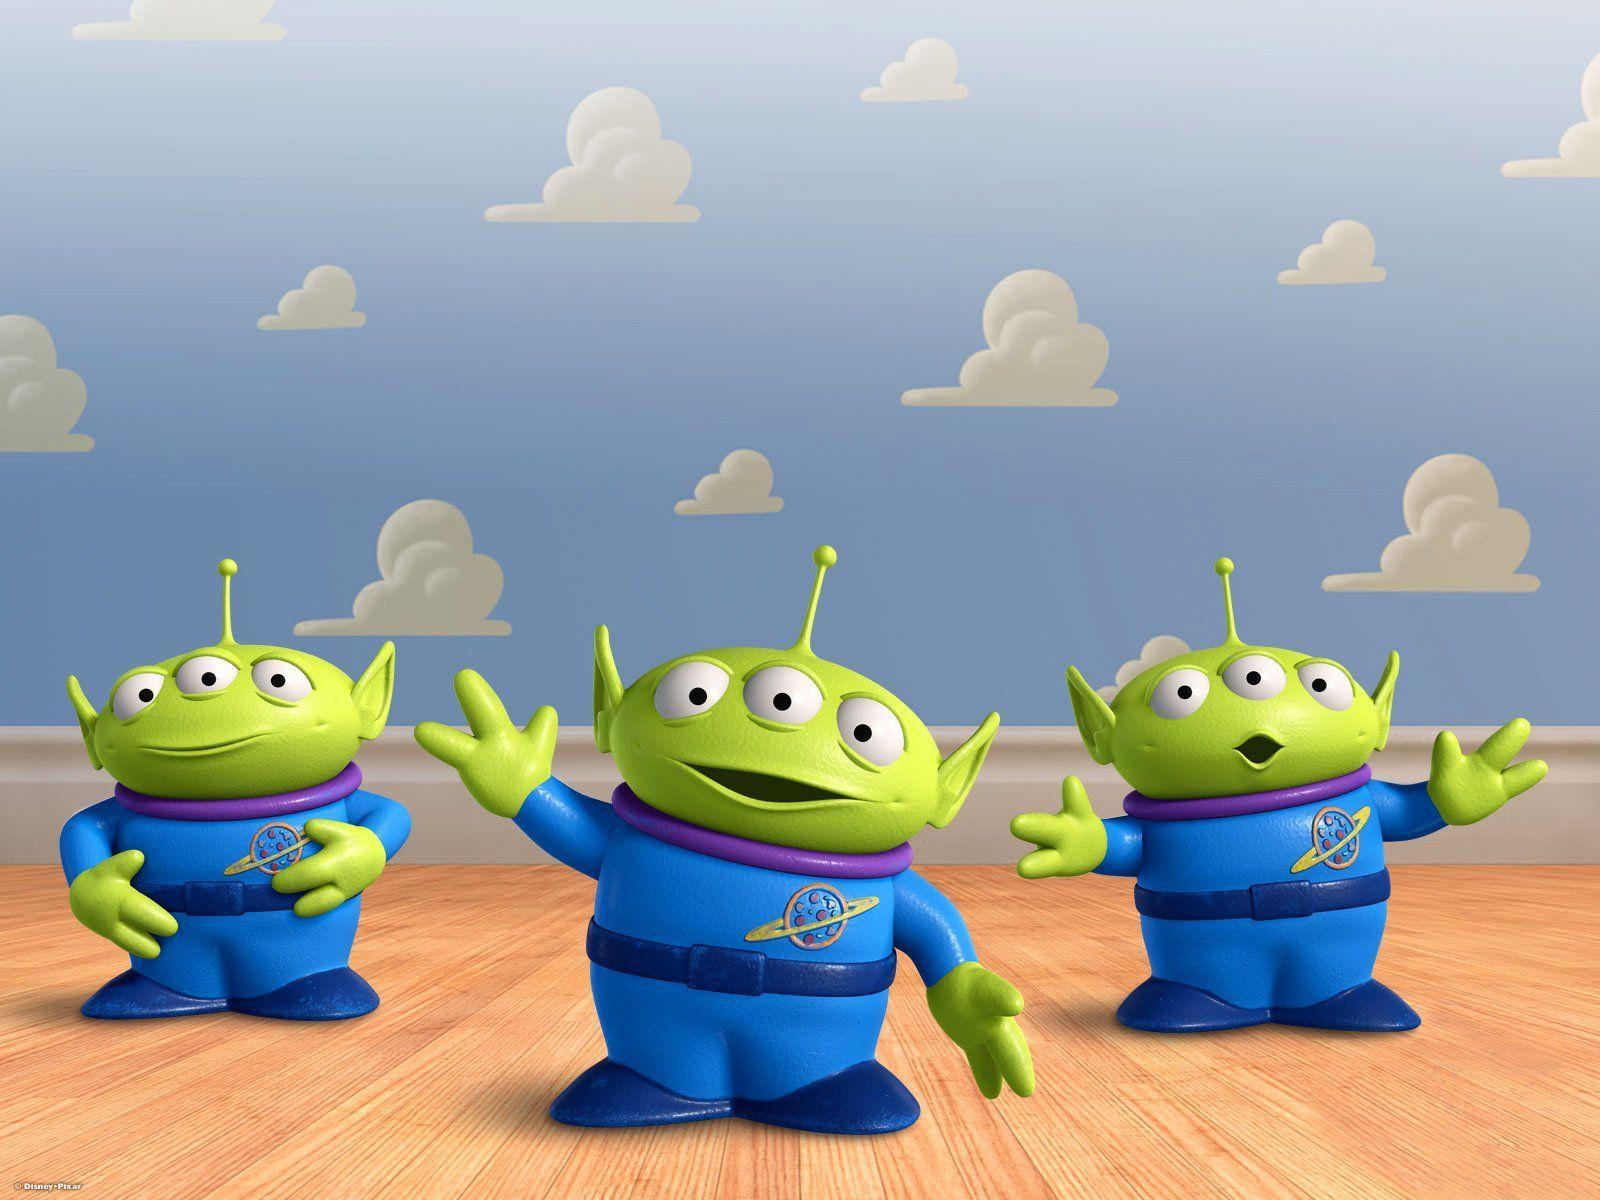 download toy story alien